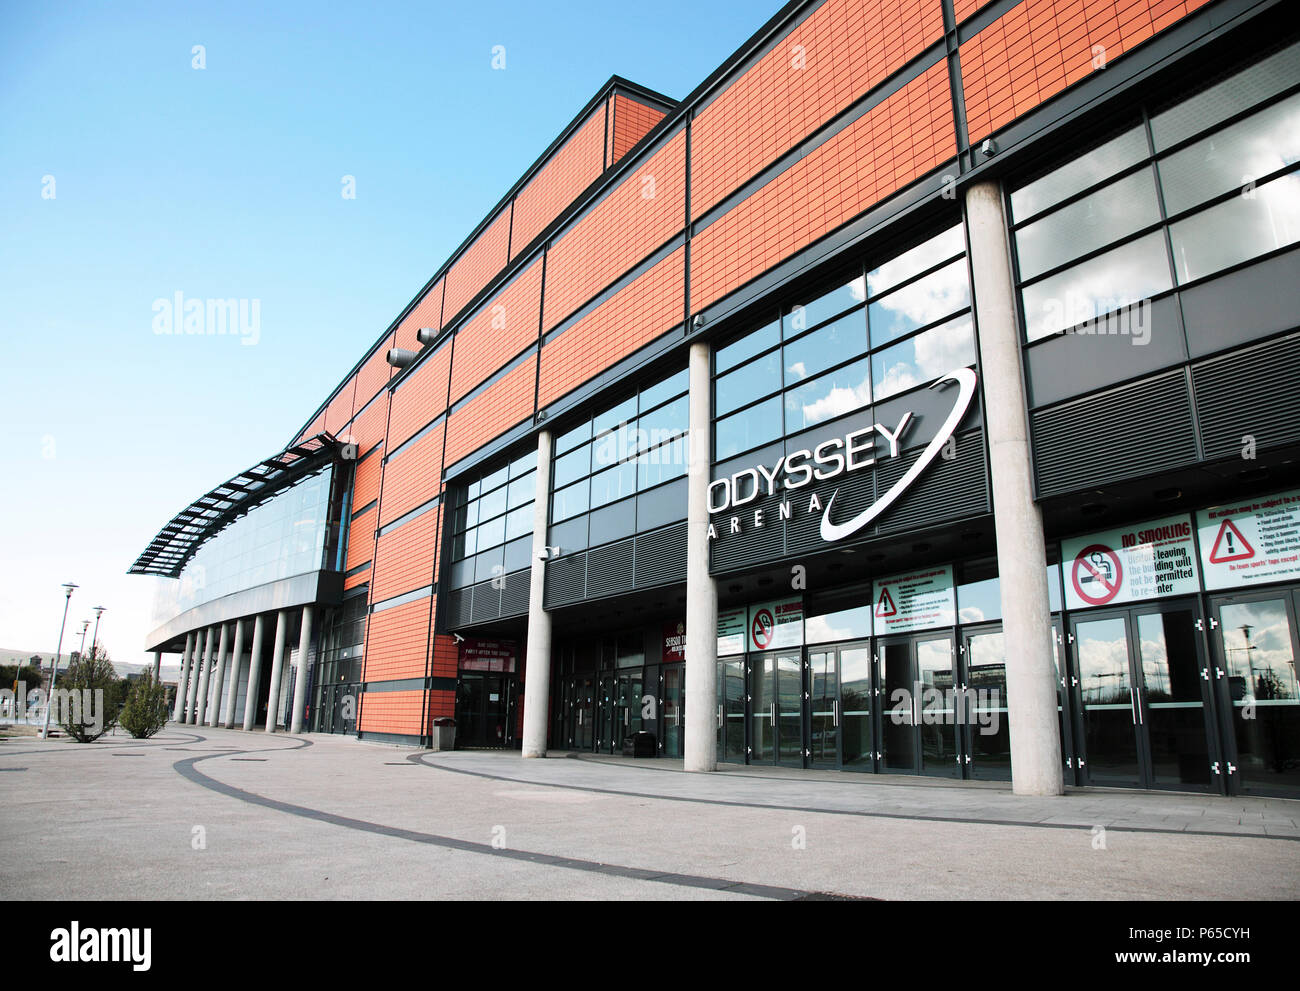 Odyssey Arena, Queen's Island, Belfast, Northern Ireland 2008. Situated in the Titanic Quarter this multi-purpose leisure complex opened in 2002. Stock Photo